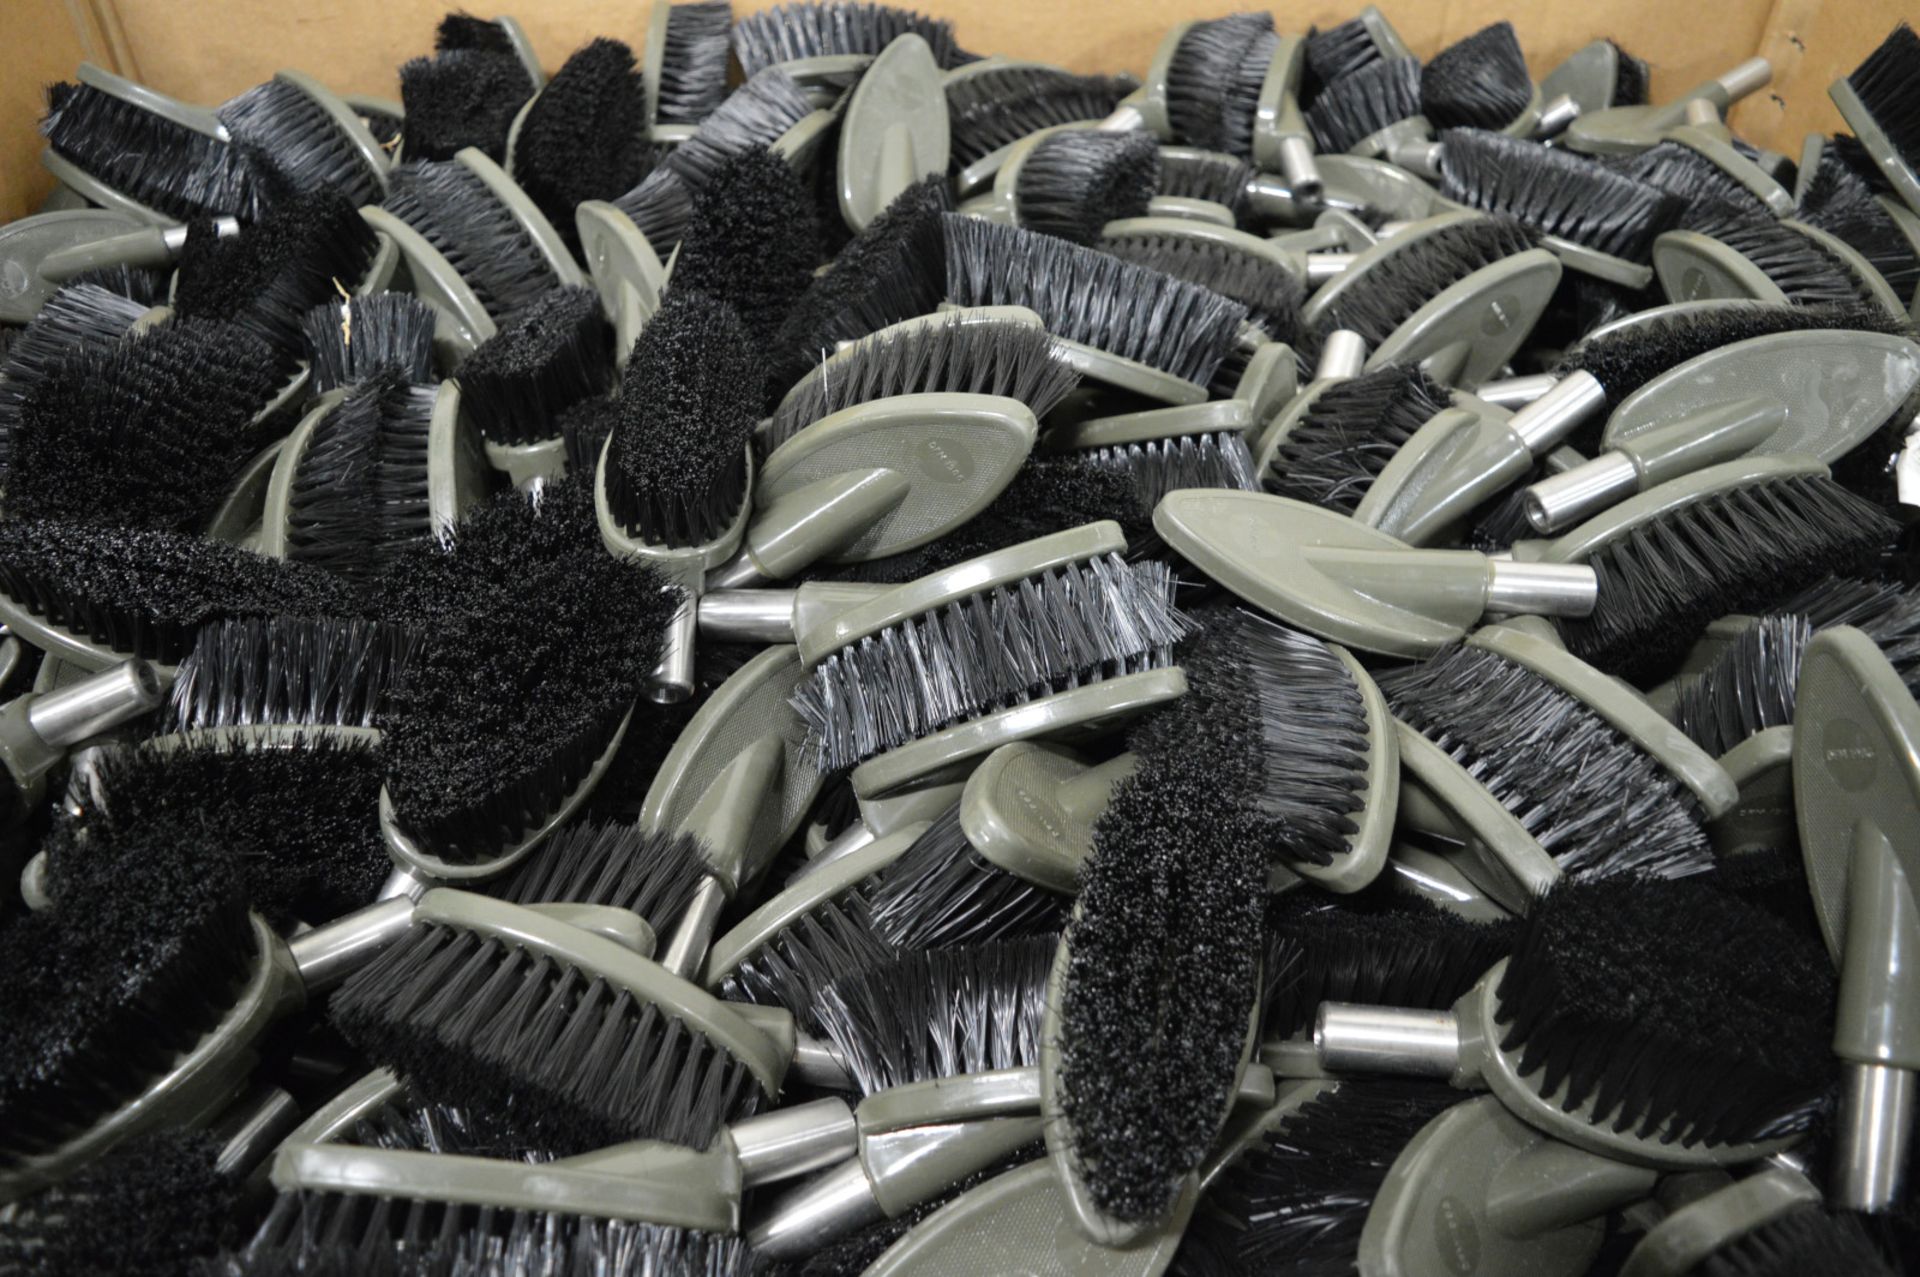 1610x High Quality Brush Heads - Made in England. - Image 2 of 2